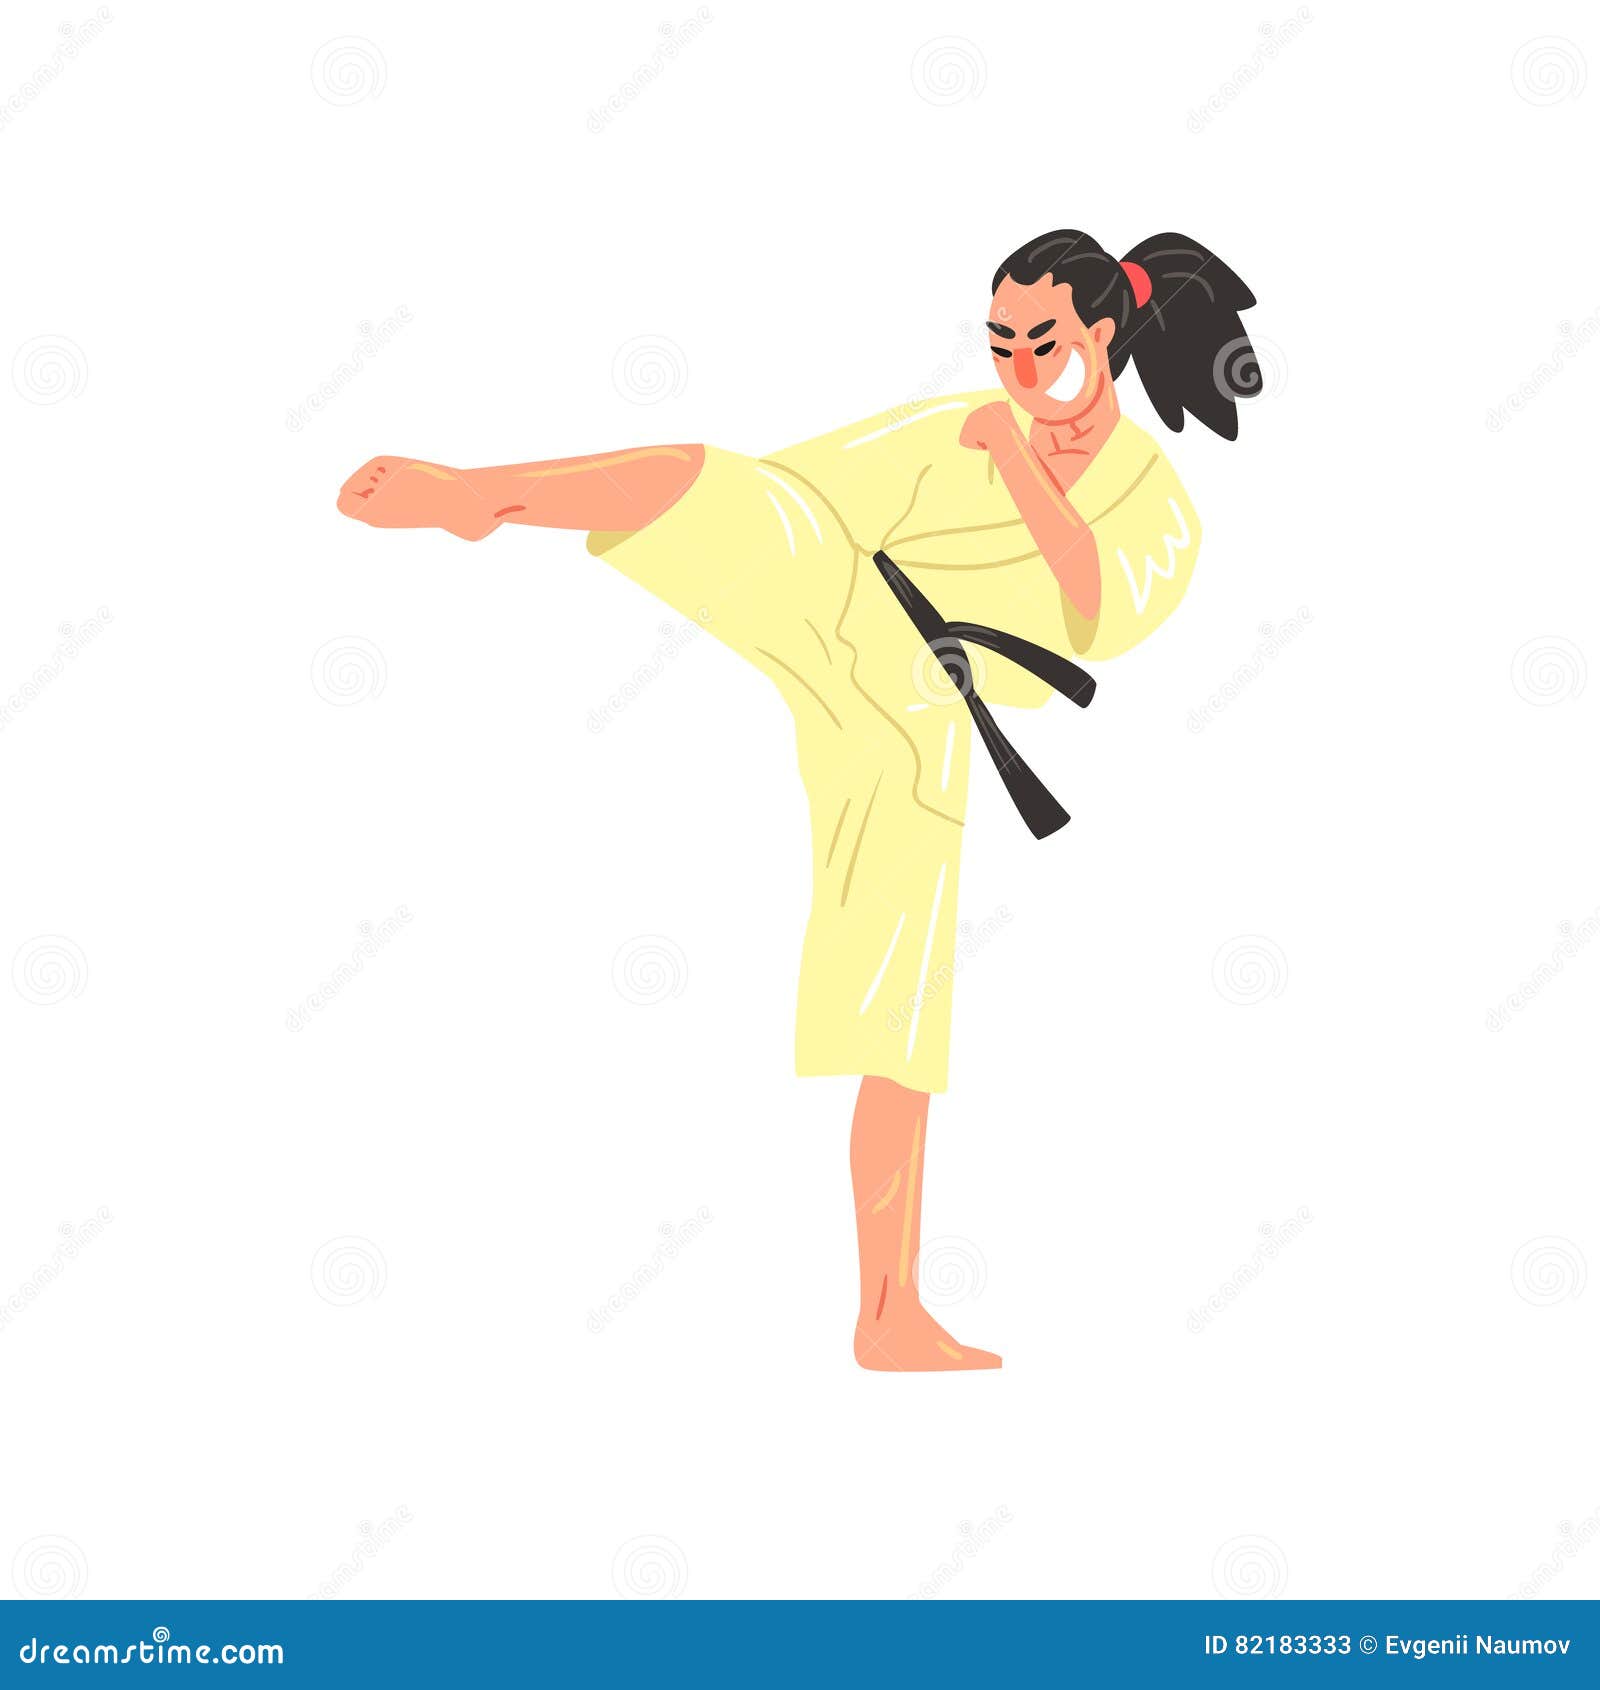 Karate Professional Fighter in Kimono with Black Belt Doing Sidkick ...